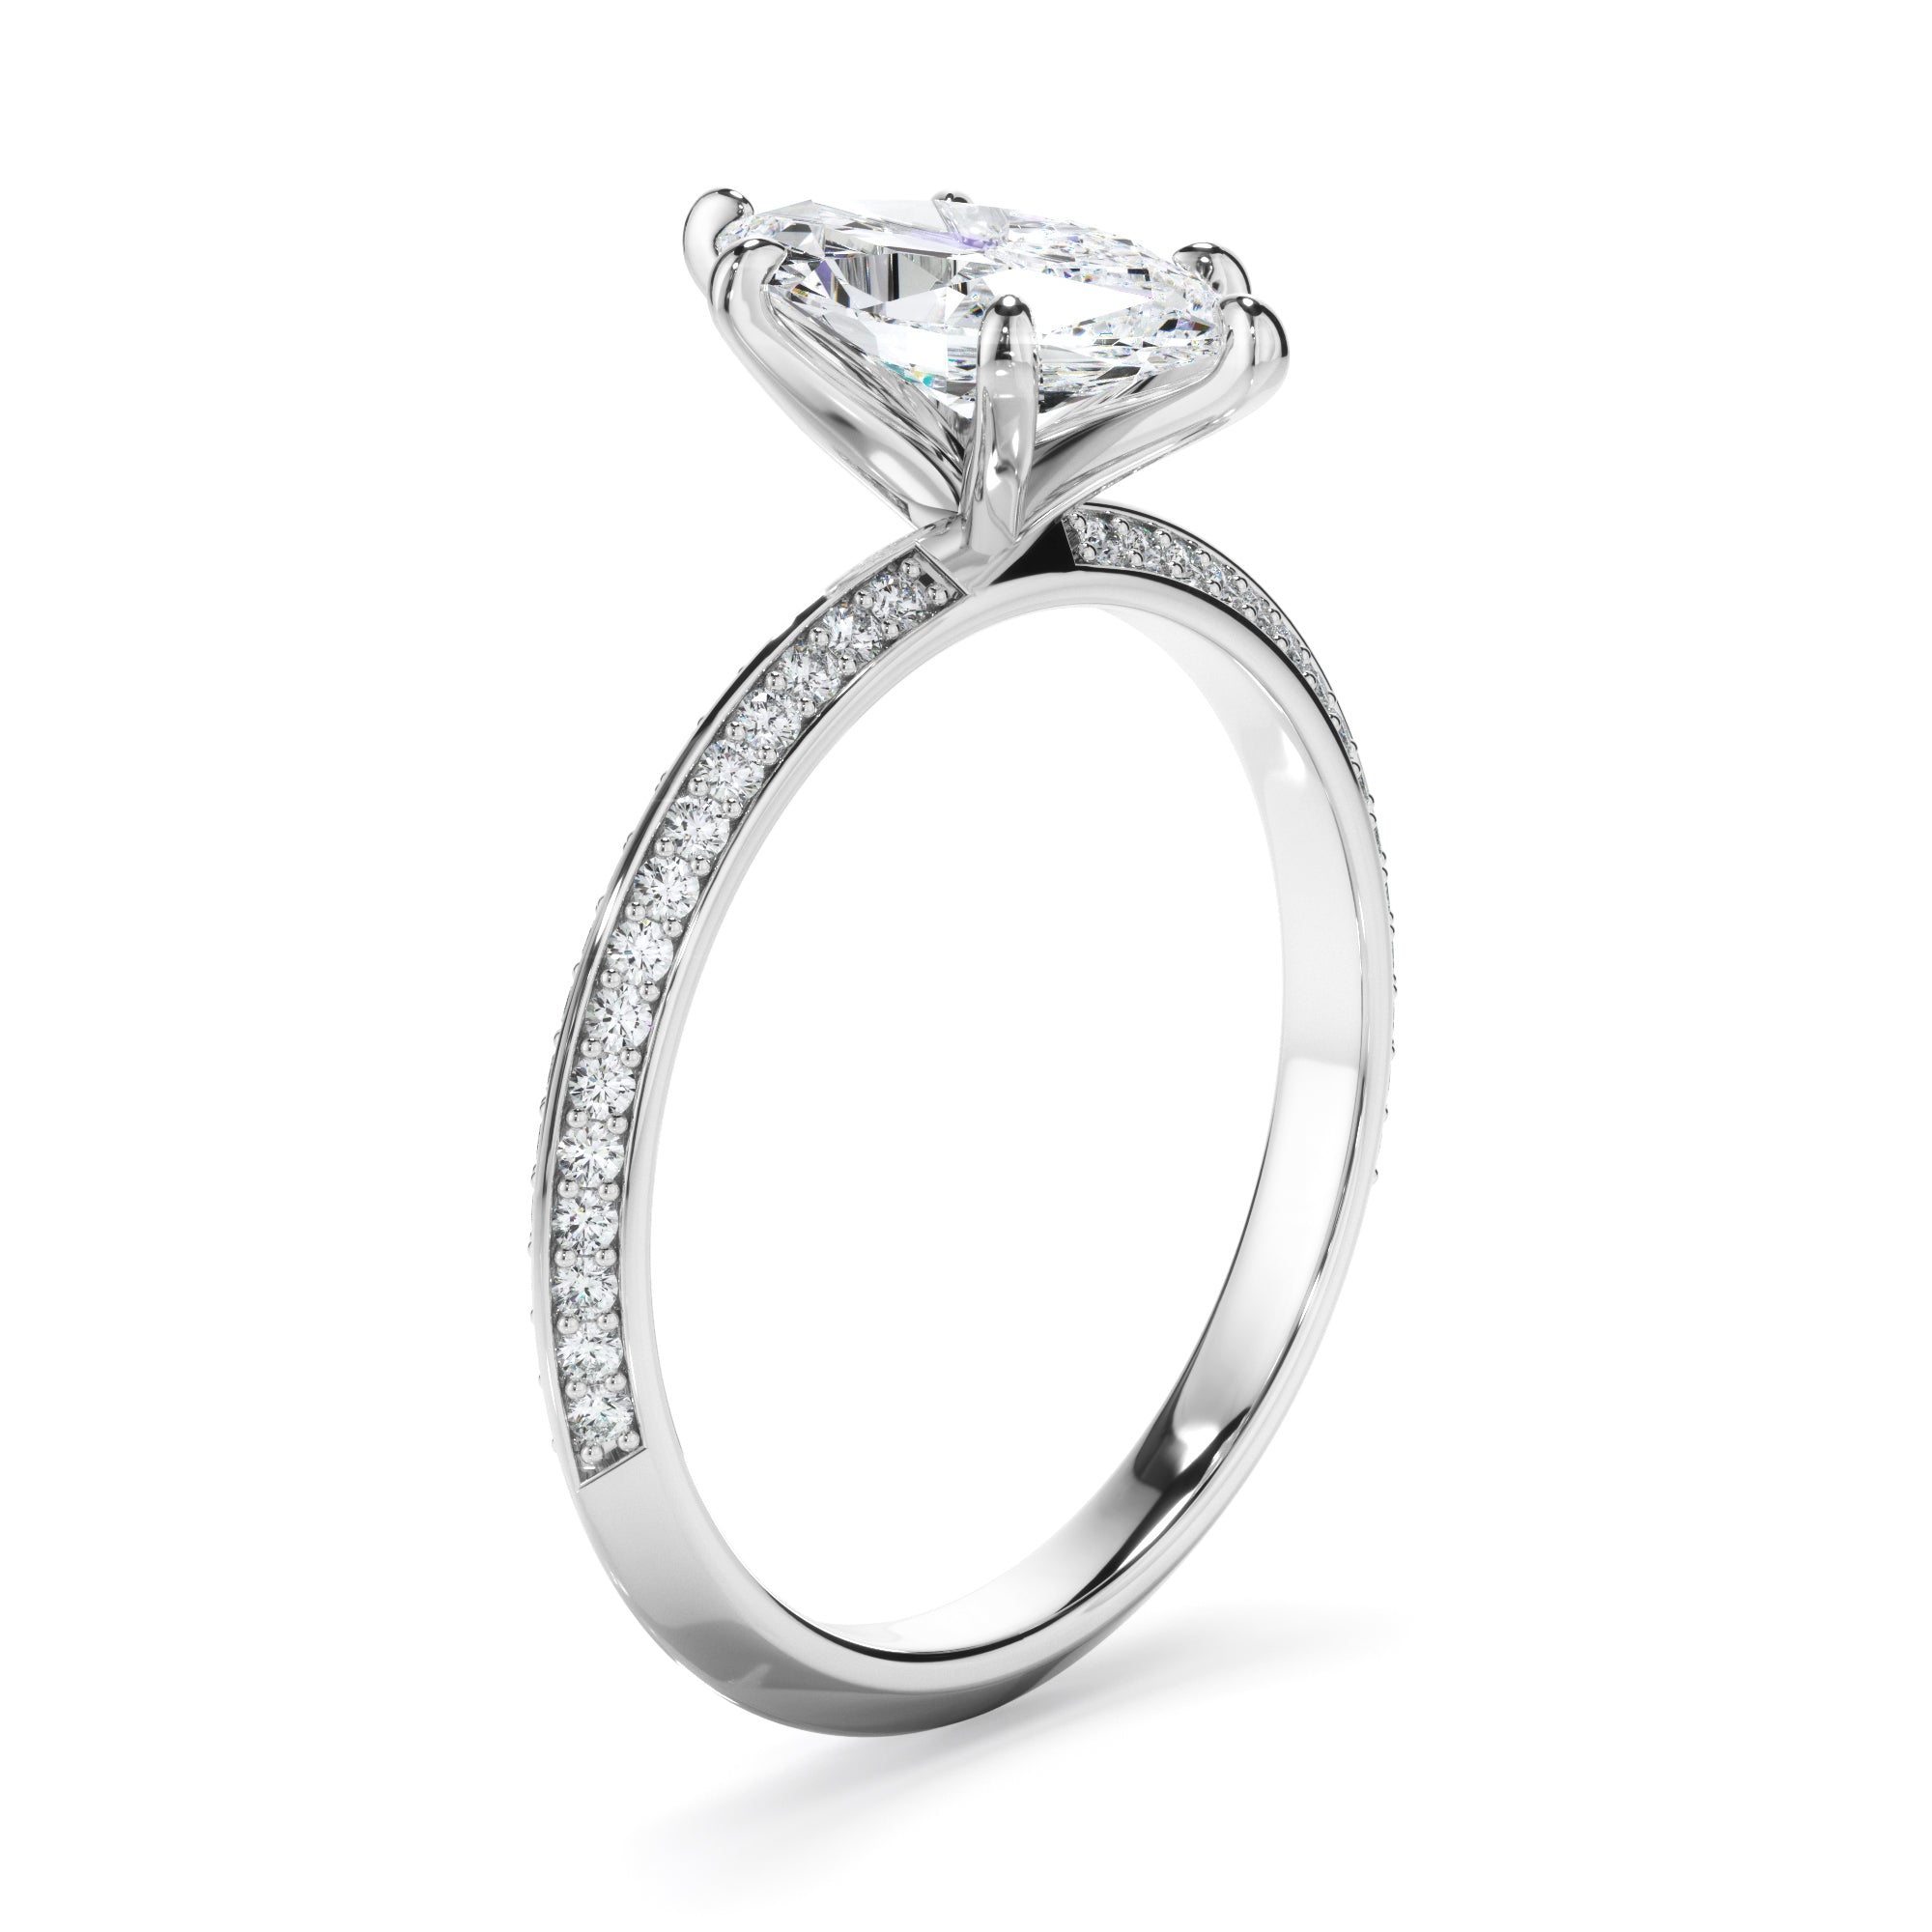 Marquise Cut Diamond Knife Edge Engagement Ring With Diamond Pave Sides